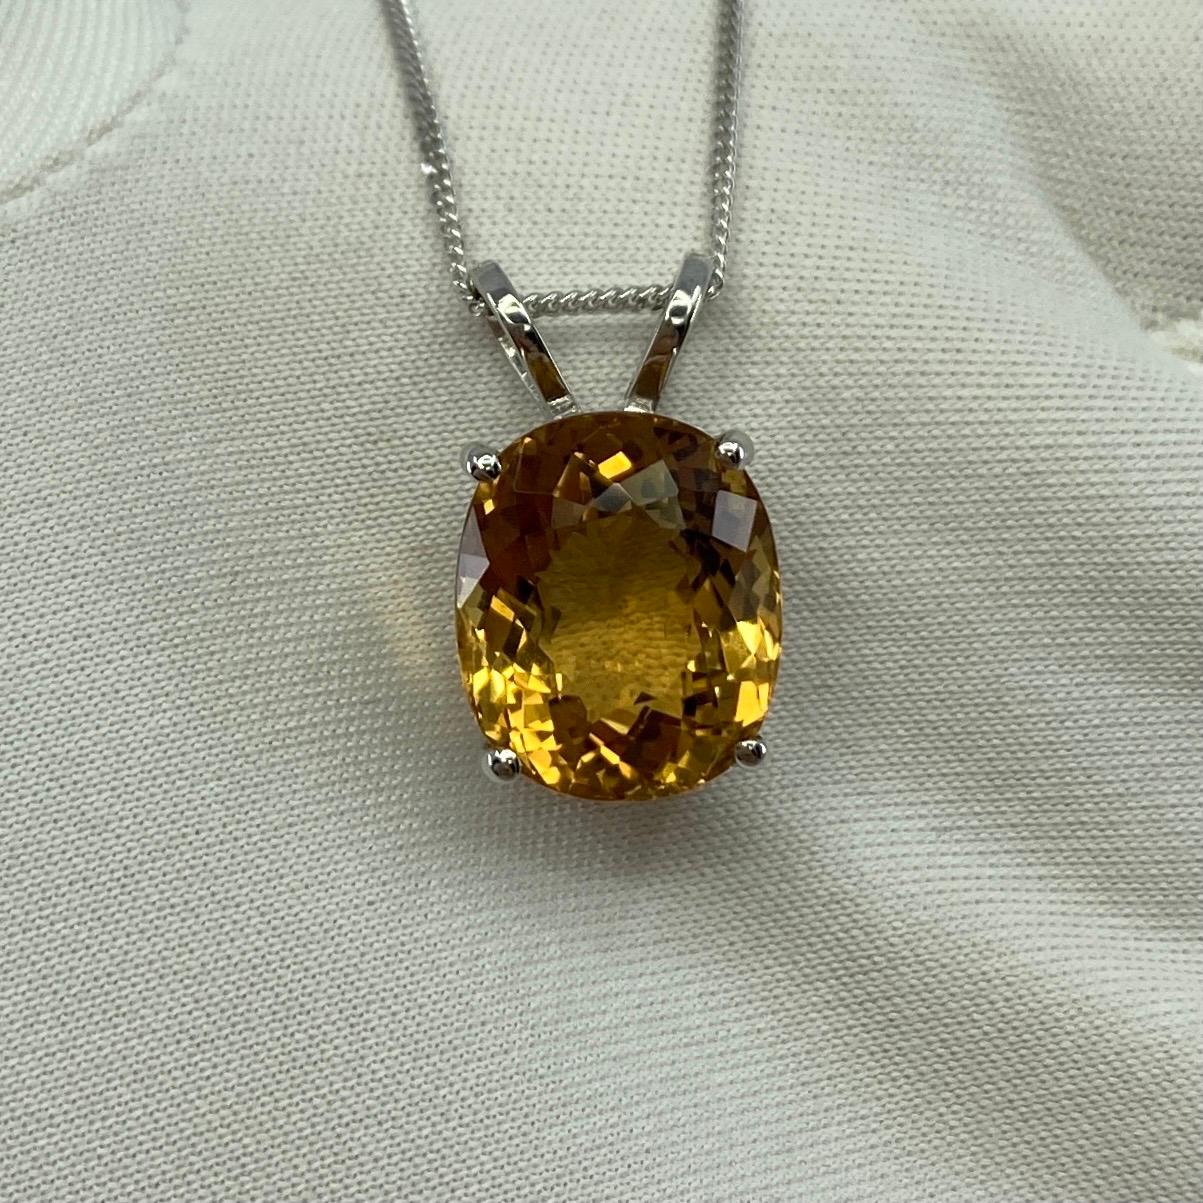 6.05ct Vivid Yellow Heliodor Golden Beryl Oval 18k White Gold Pendant Necklace For Sale 1